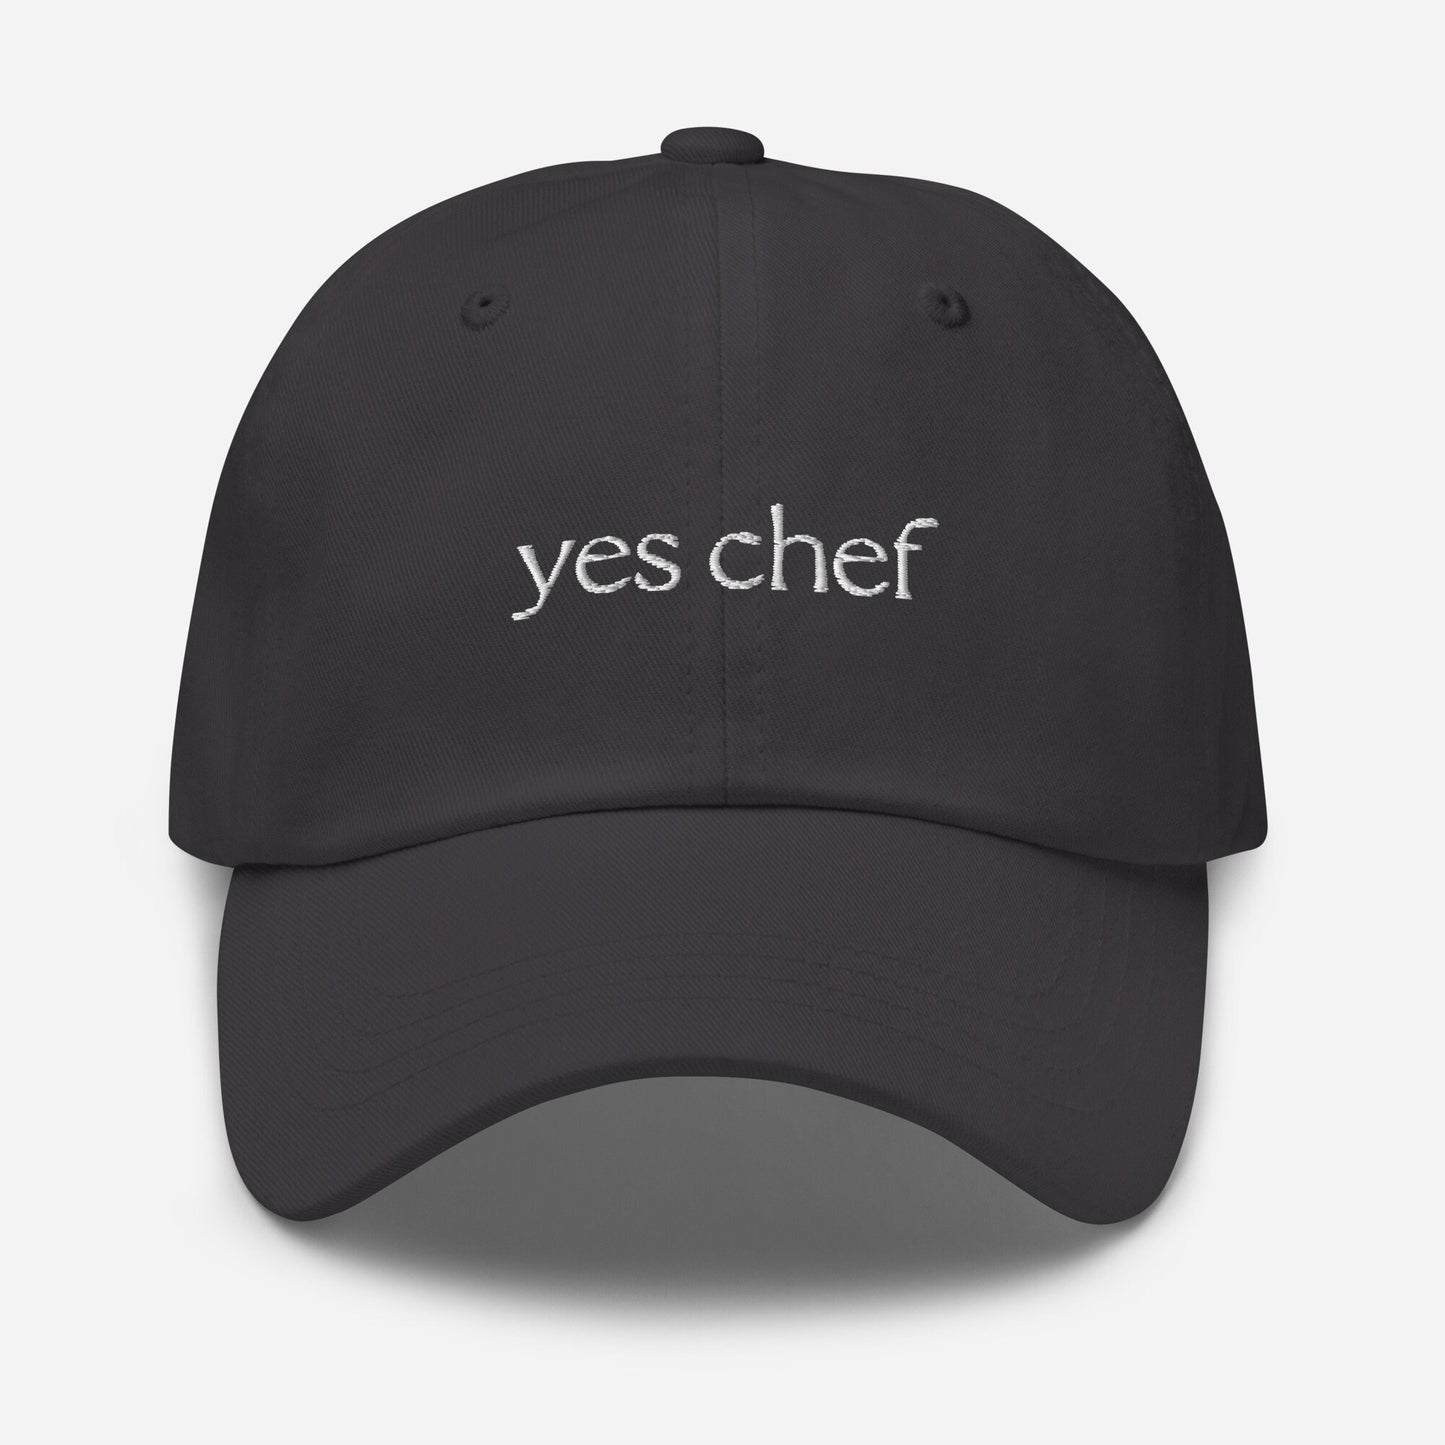 Yes Chef Dad Hat - Funny Gift for Foodies, Home Cooks, Bakers & Culinary Students - Embroidered Cotton Cap